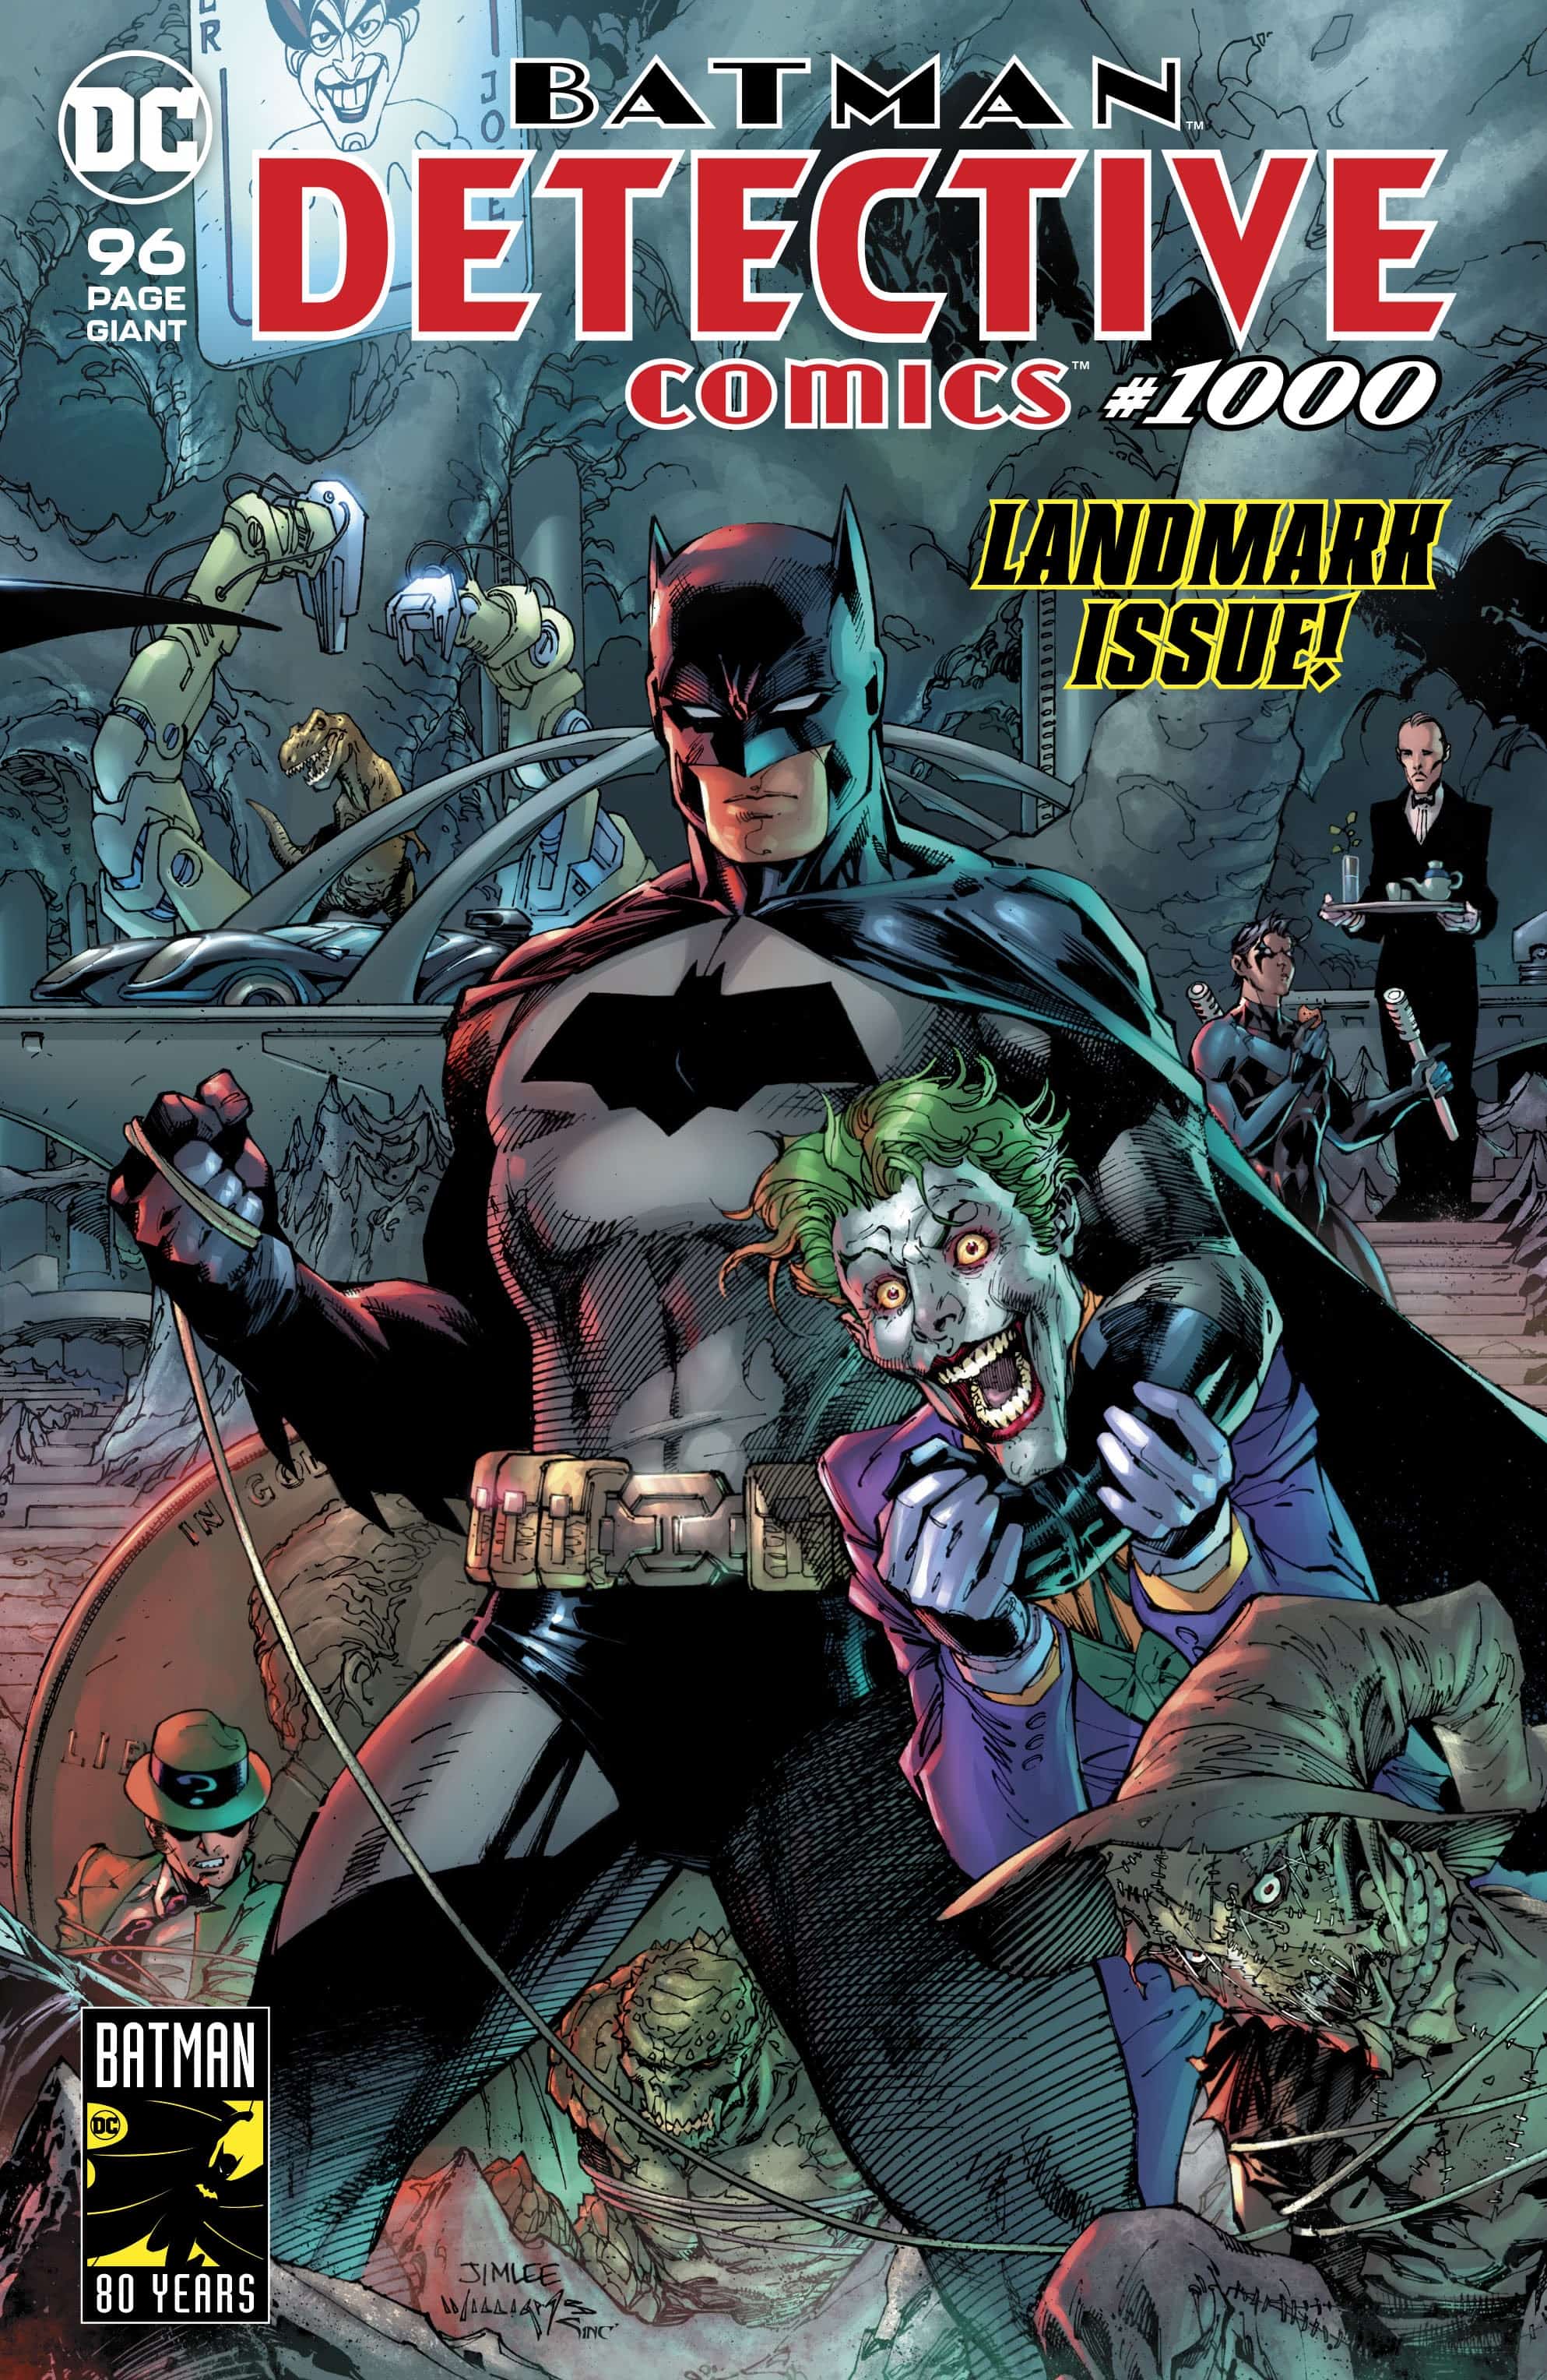 Detective Comics #1000: After 80 Years, It's Here! - Comic Watch